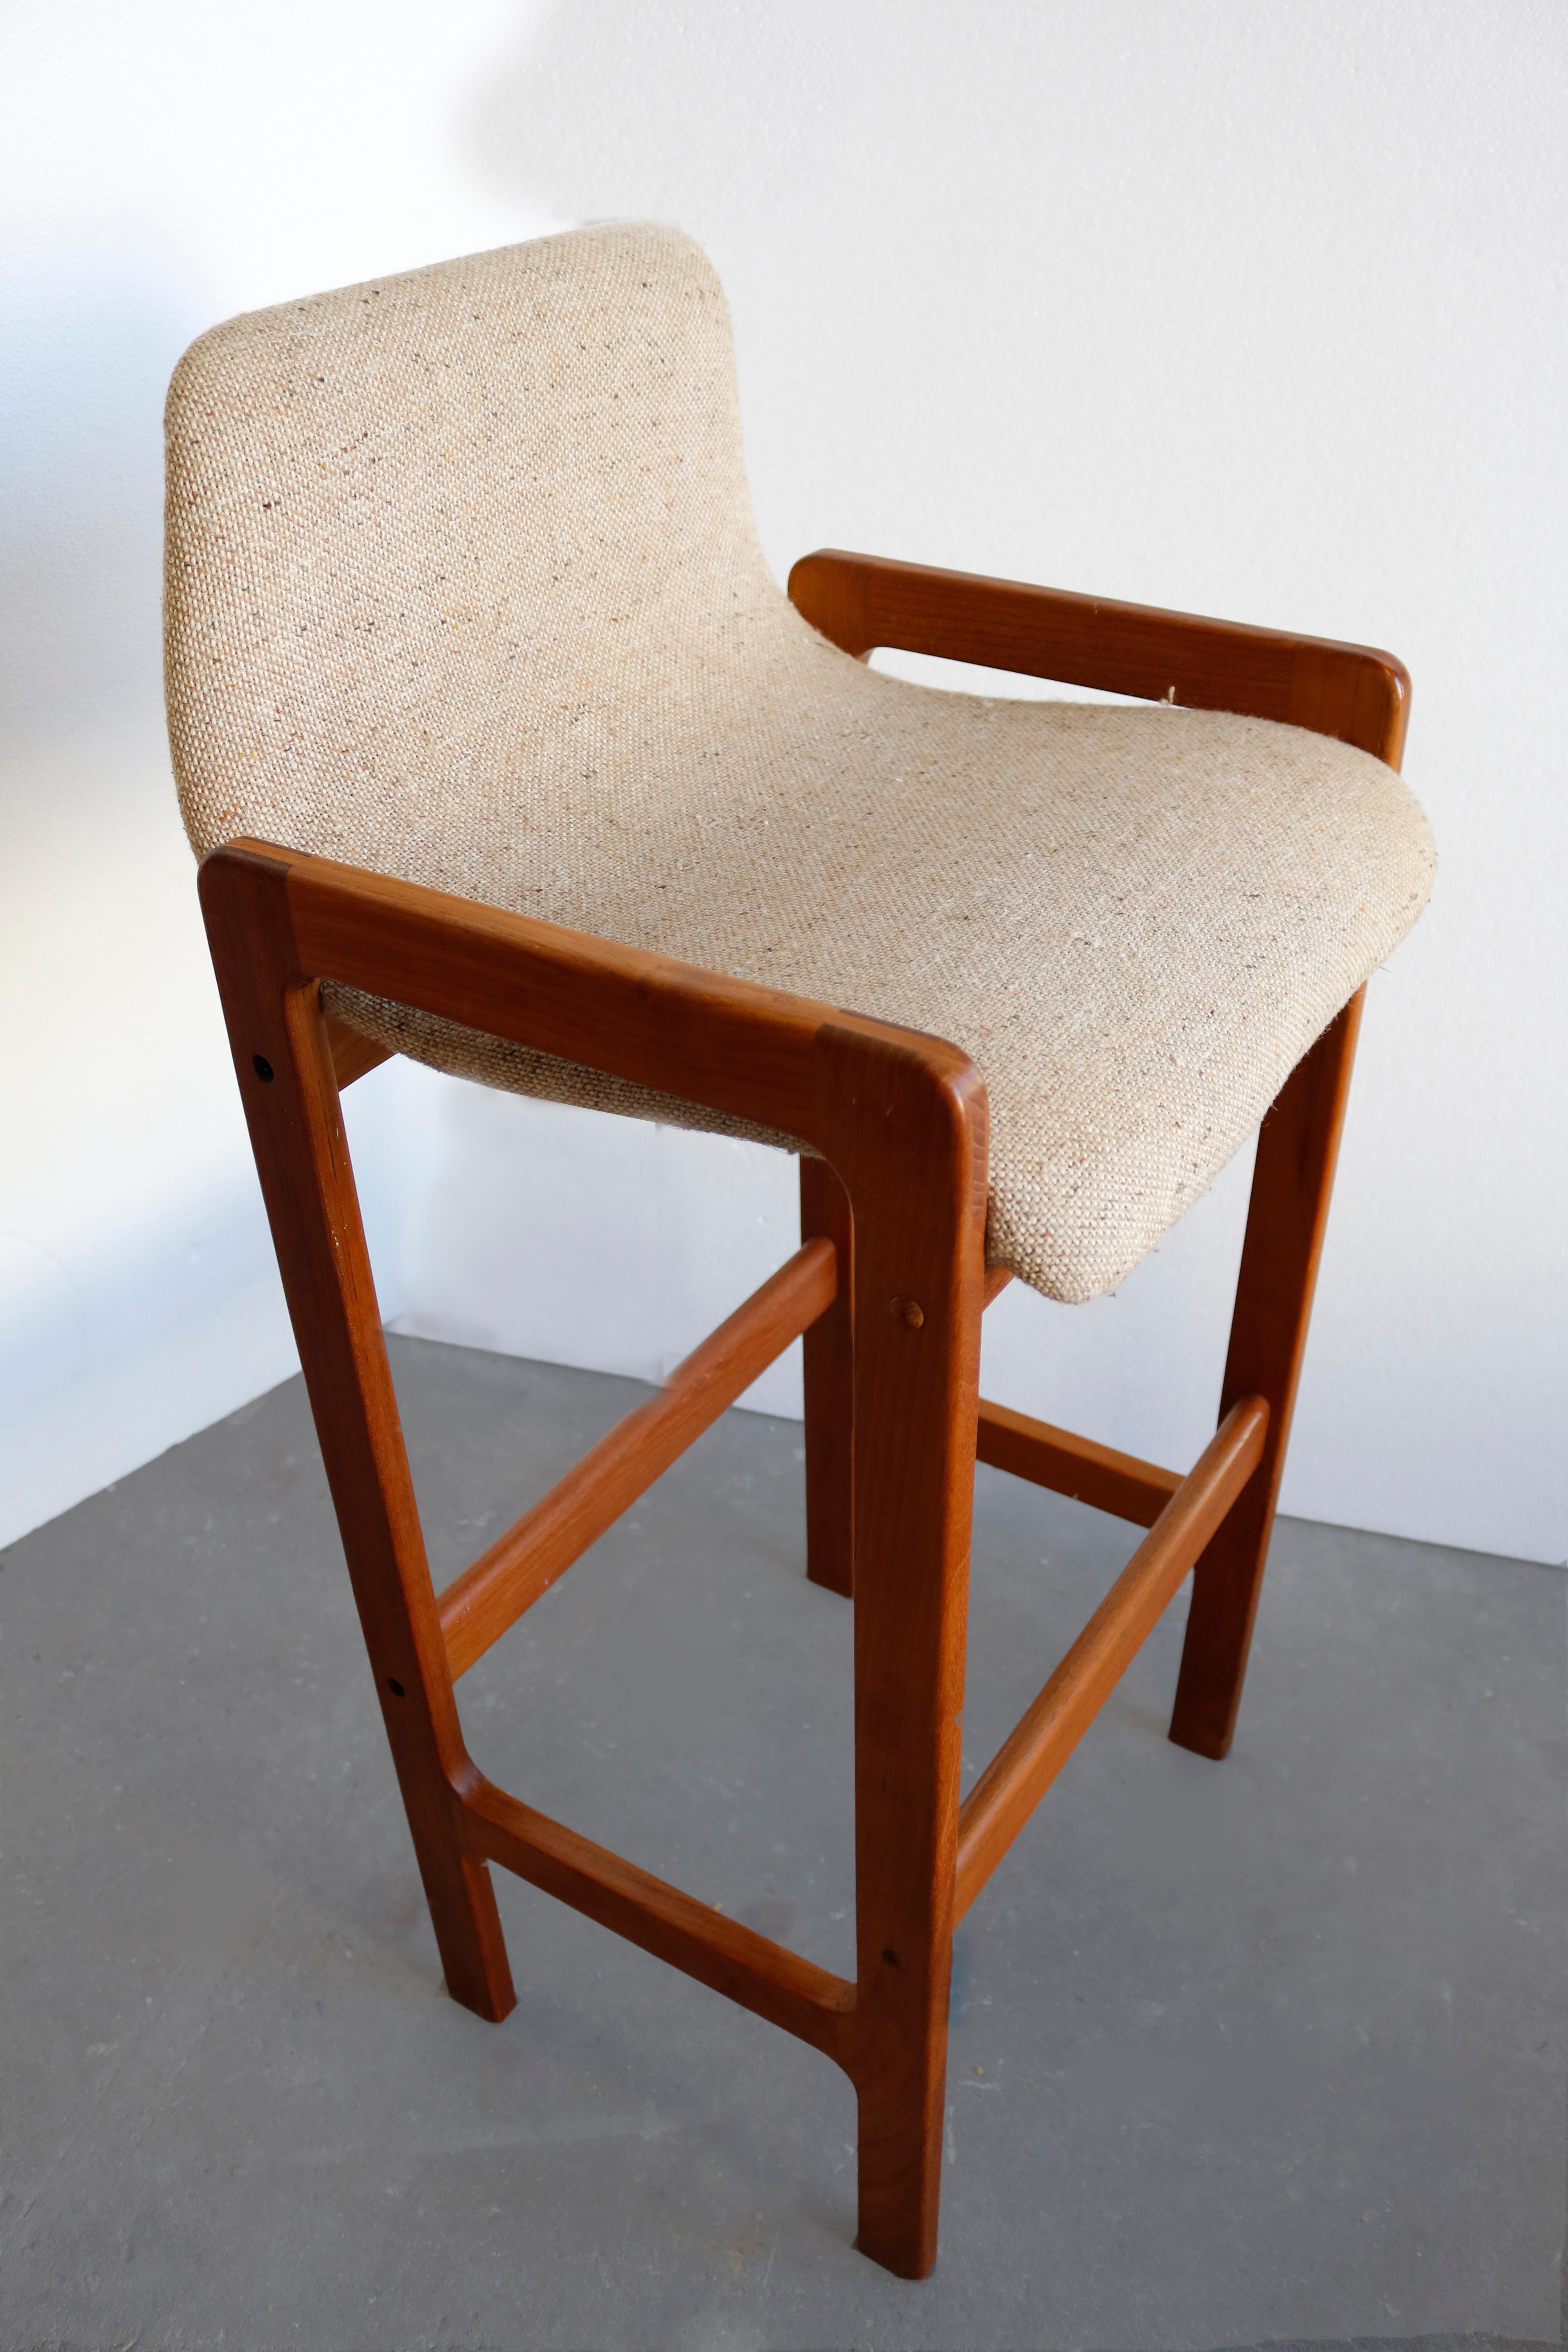 Comfy, Danish bar stools framed in teak wood and upholstered in tweed wool upholstery.